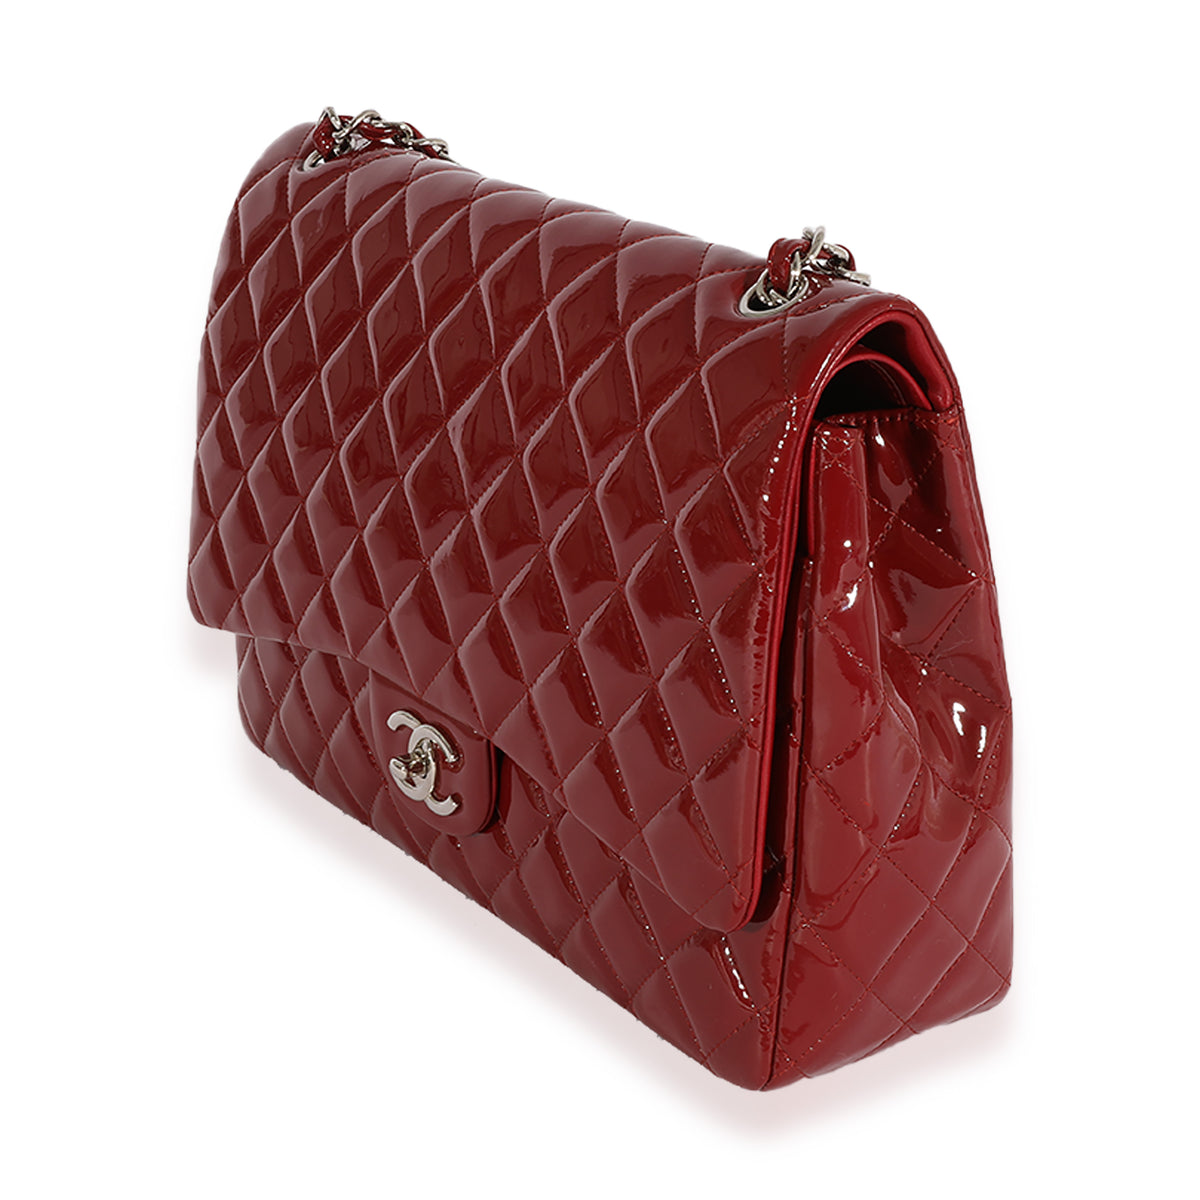 Chanel Red Patent Leather Mini Madison Flap Bag